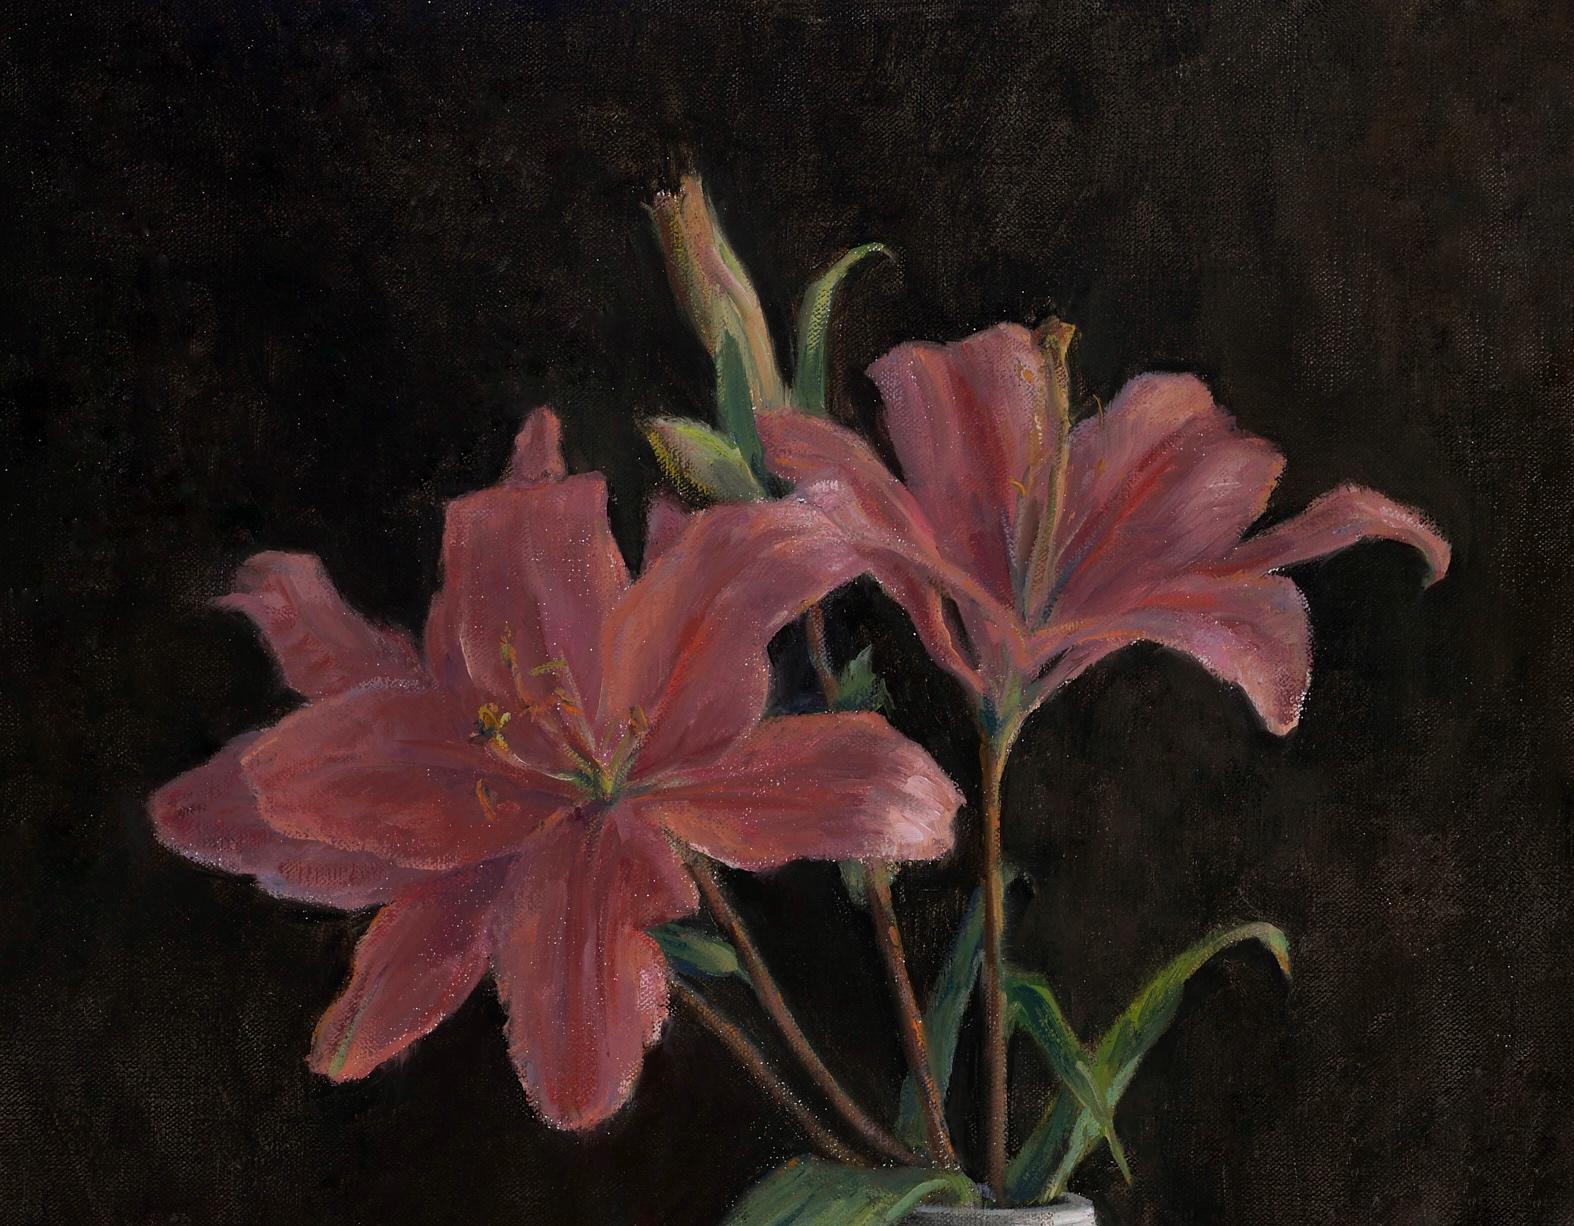 Pink Lilies 20 x 16 is an  Oil Painting by  European Artist/Croatian artist Tina Orsolic Dalessio who was classically trained.

Tina Orsolic Dalessio is a figurative and still-life painter born in Zagreb, Croatia.  She received her formal academic